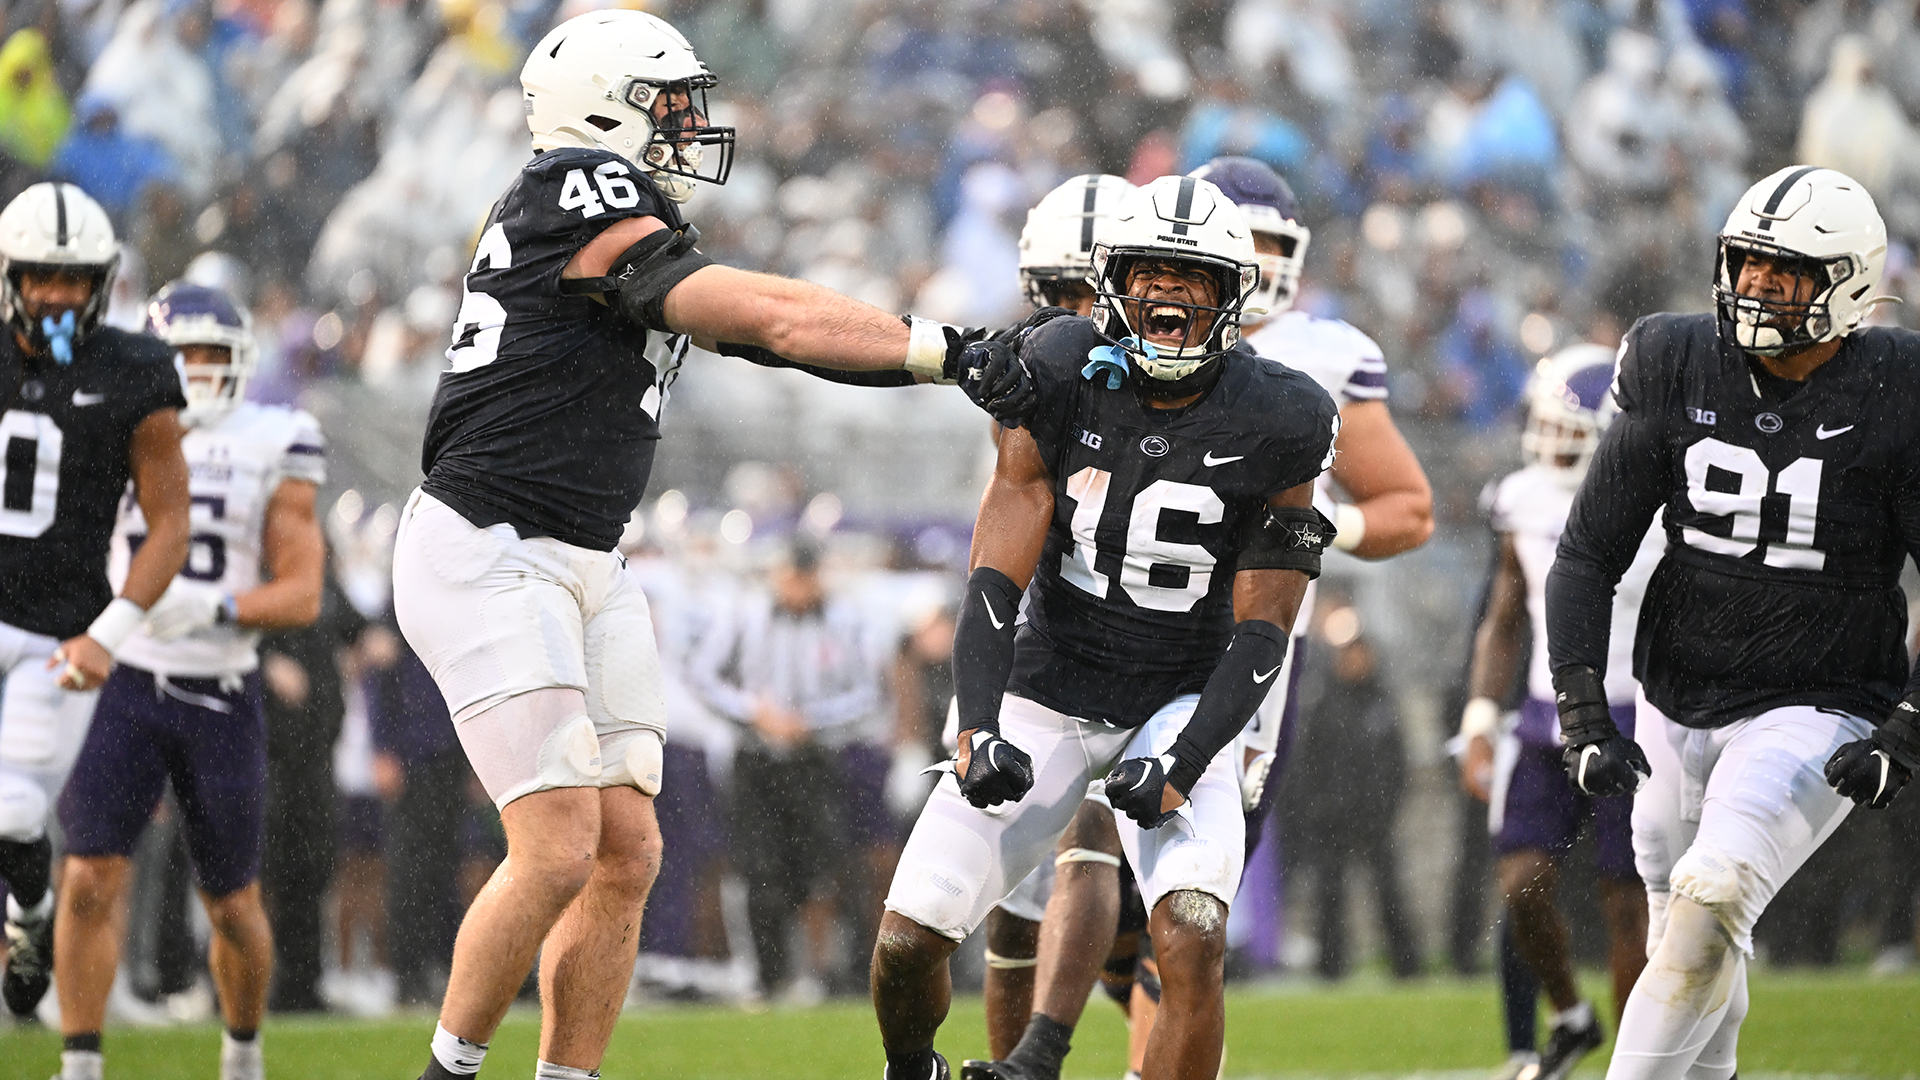 Penn State Top 5 NFL Draft Prospects